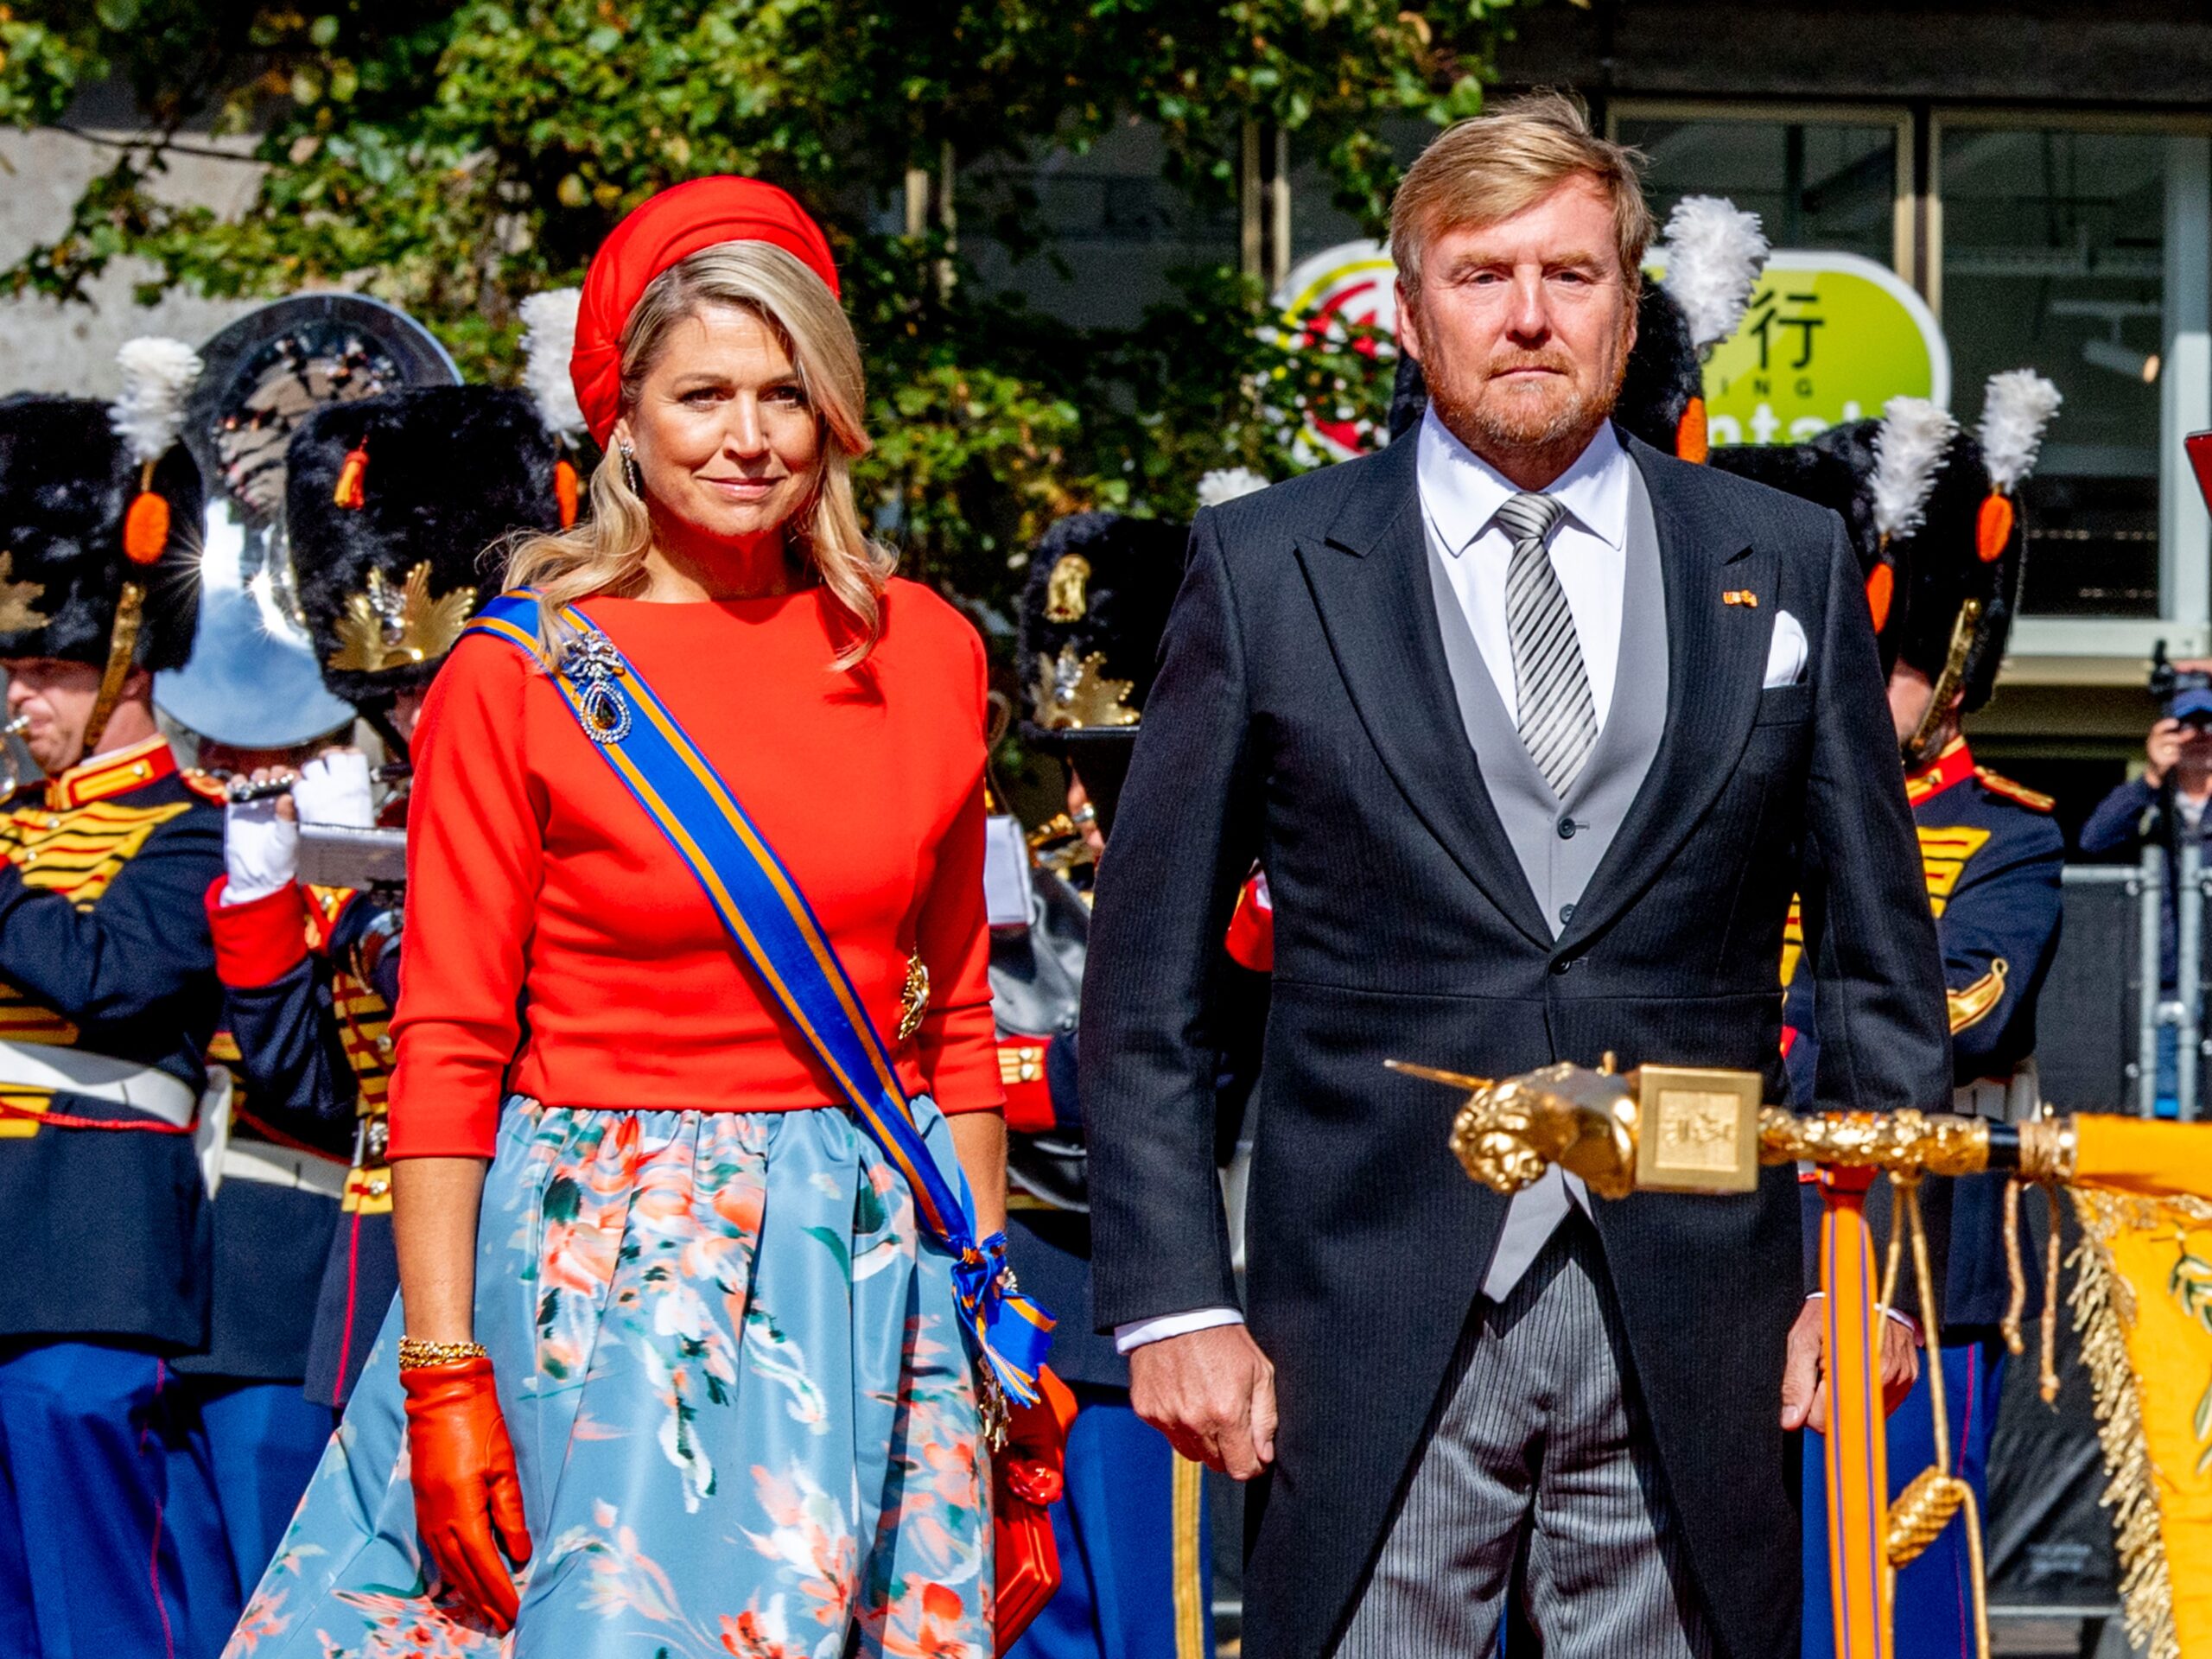 King Willem-Alexander of The Netherlands and Queen Maxima of The Netherlands attends Prinsjesdag the annual opening of the parliamentary year in the Grote Kerk on September 21, 2021 in The Hague, Netherlands.